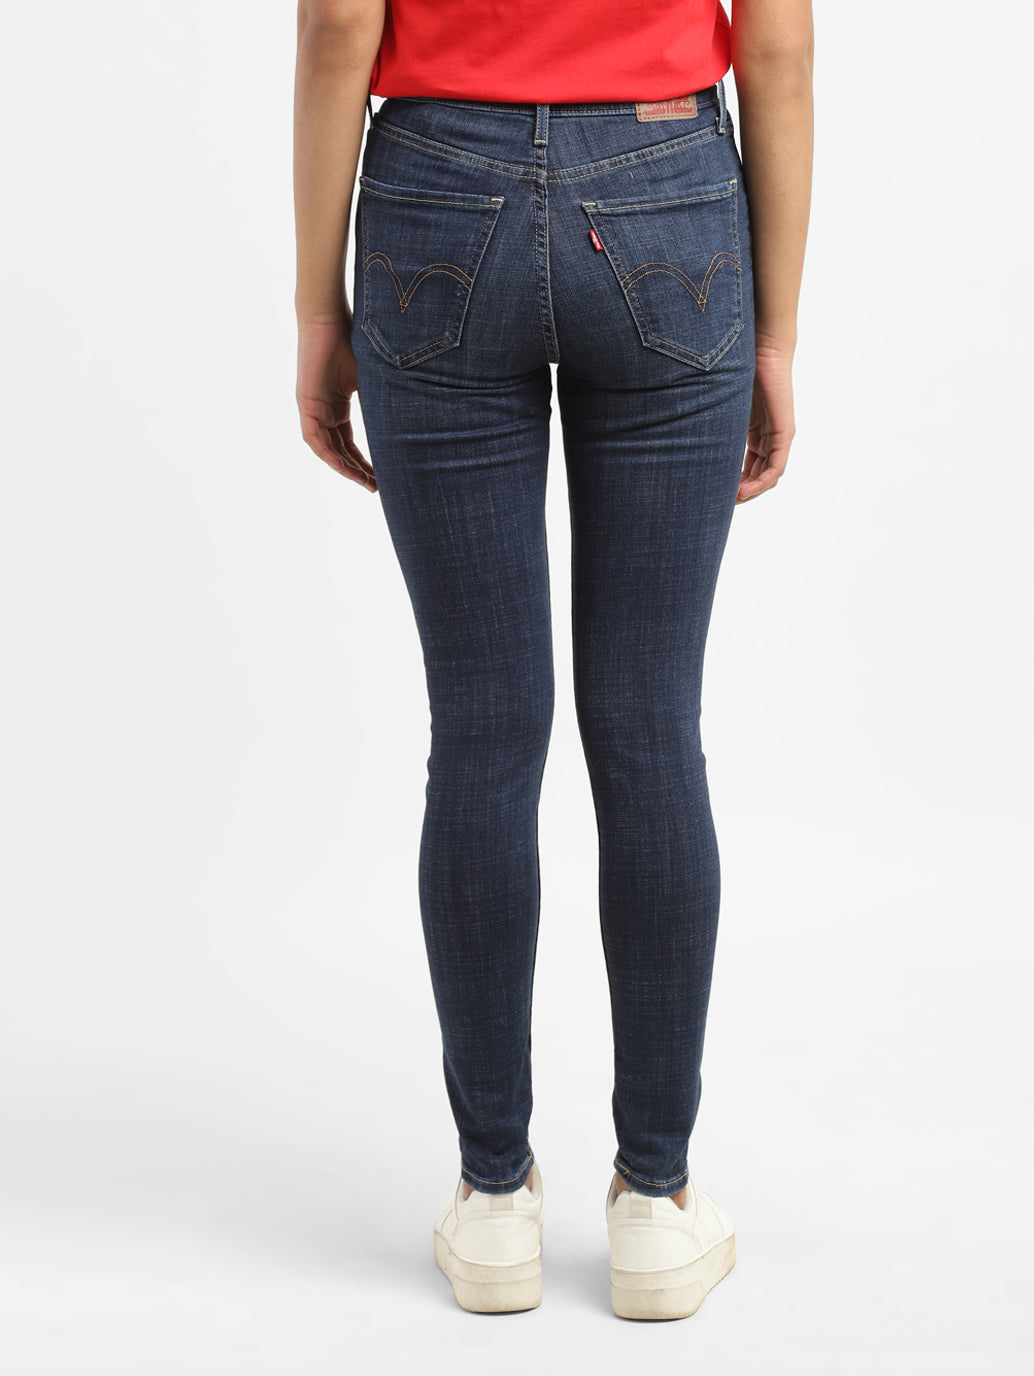 Women's High Rise Mile High Skinny Jeans